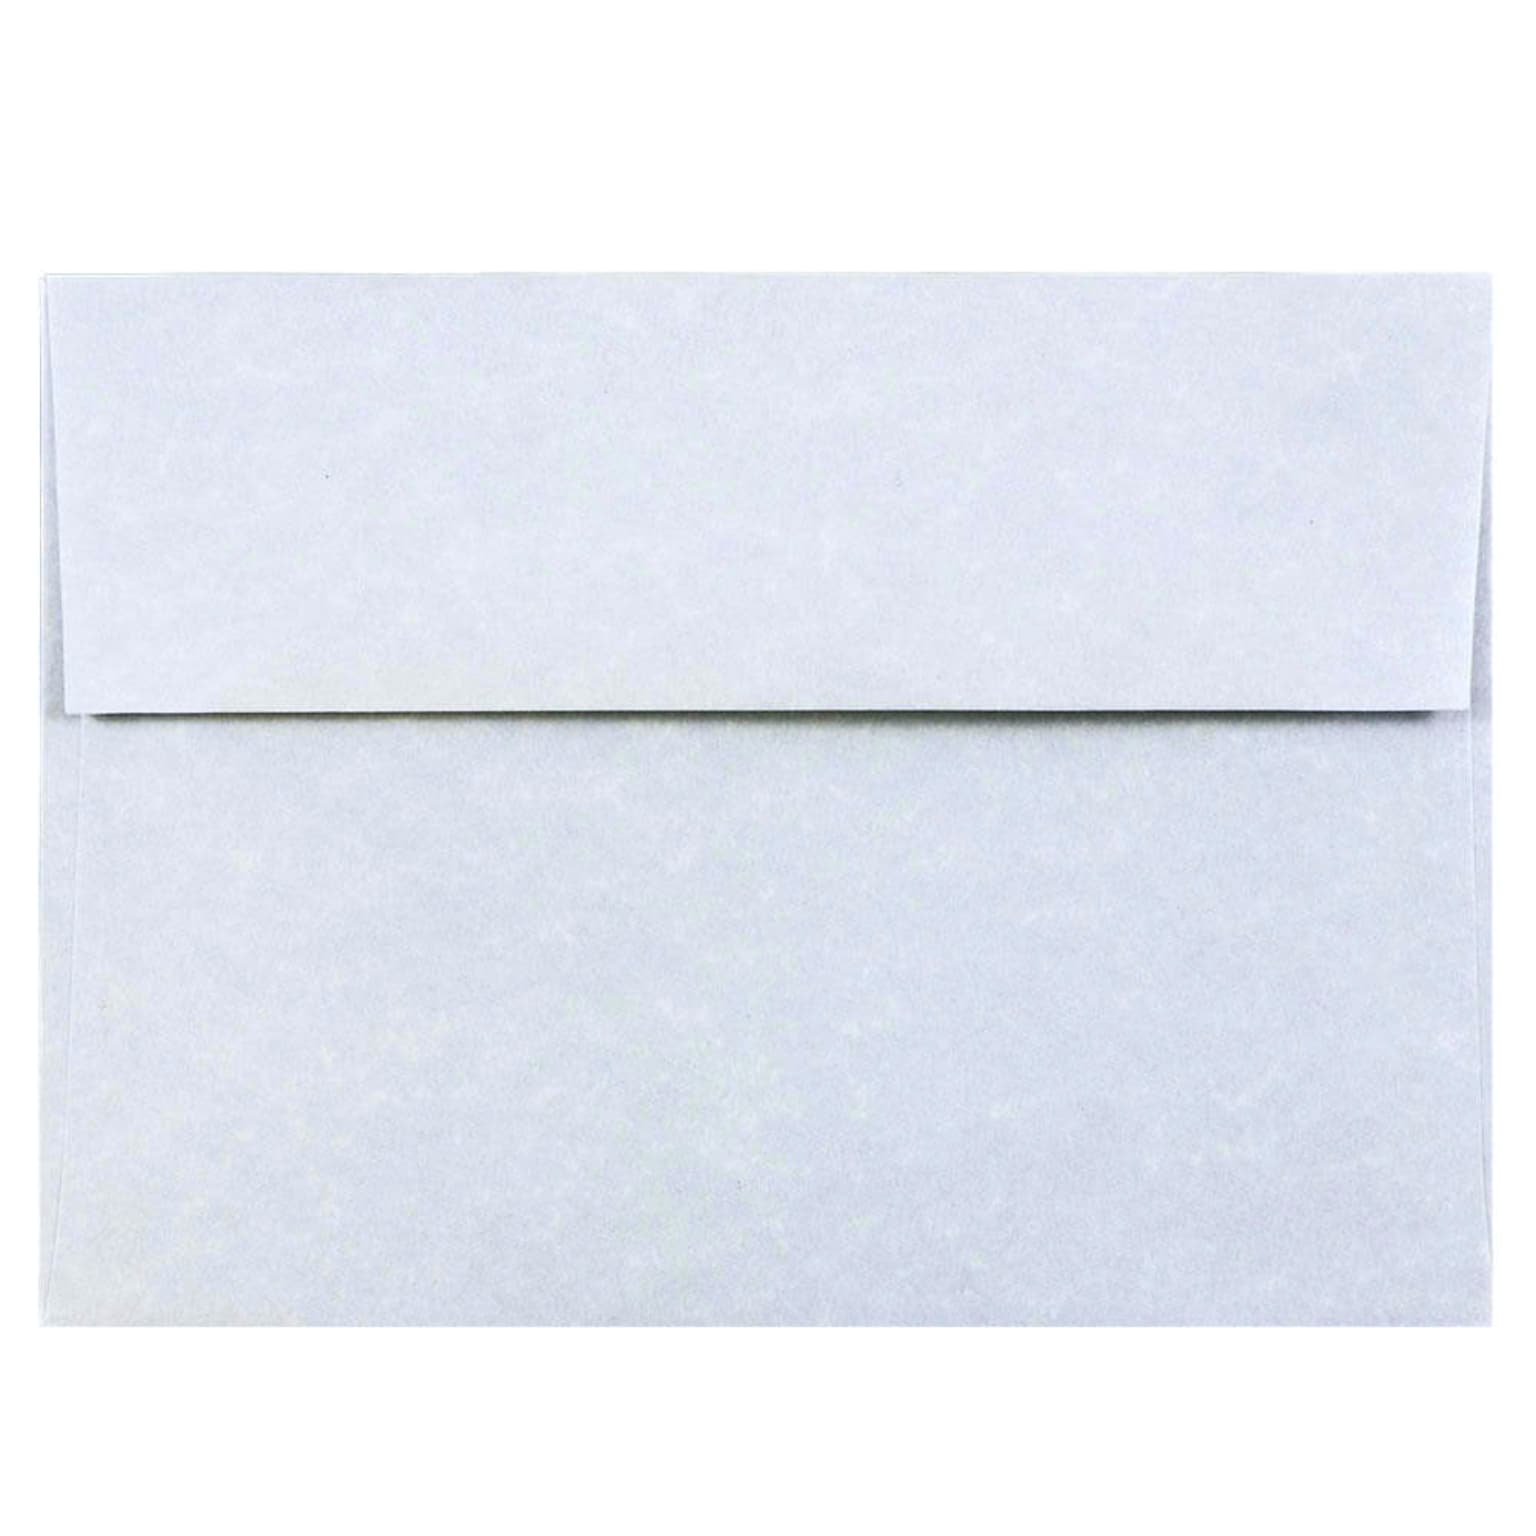 JAM Paper® A7 Parchment Invitation Envelopes, 5.25 x 7.25, Blue Recycled, 25/Pack (10379)